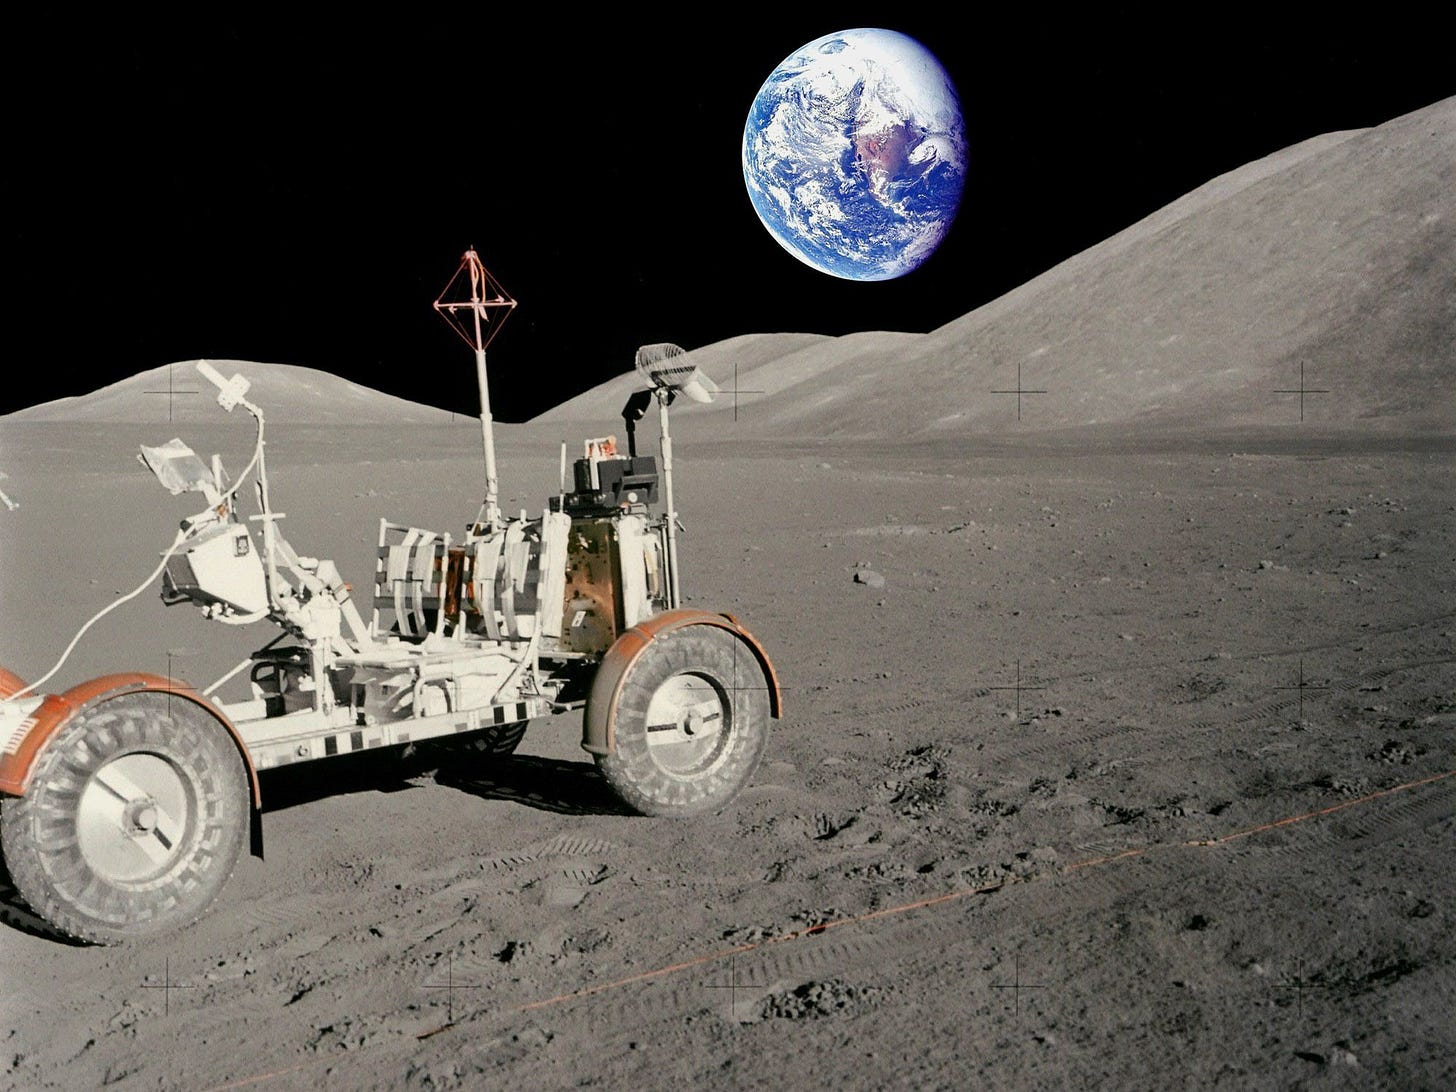 Earth seen from Moon with lunar rover in the foreground